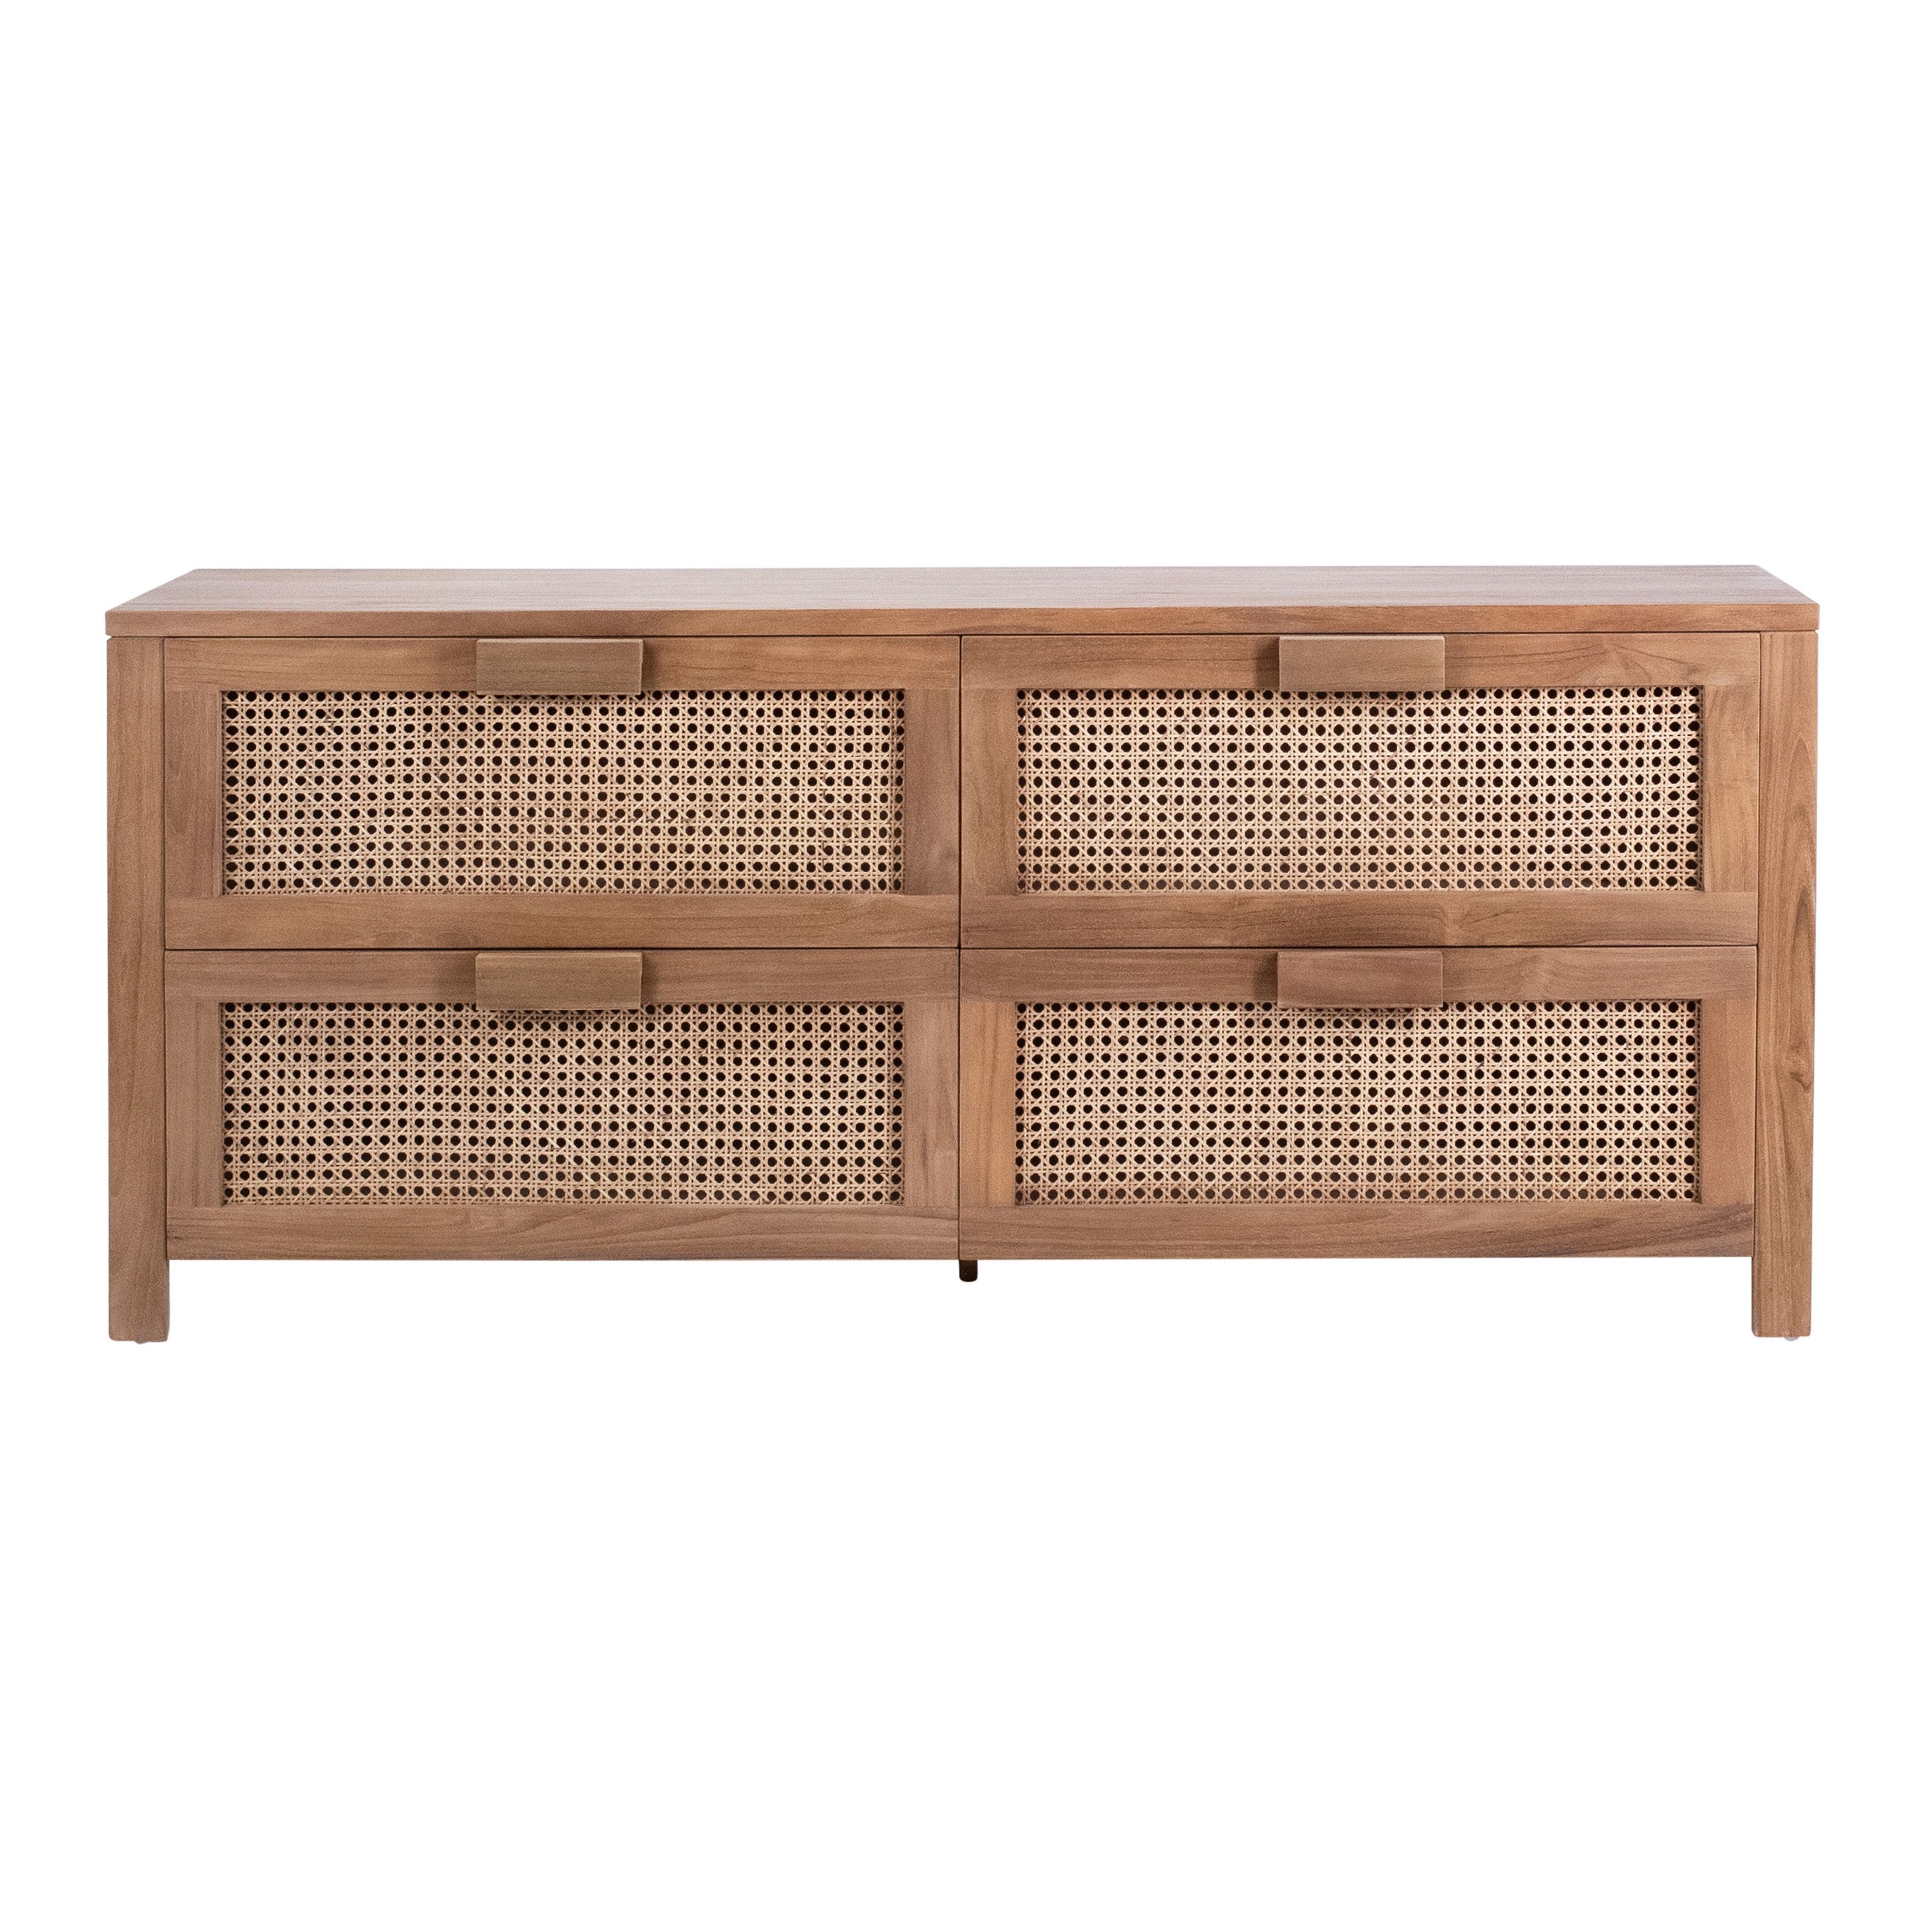 Elliana 63-inch Teak and Woven Rattan 4-Drawer Sideboard in a Natural  Finish - Bed Bath & Beyond - 36910802